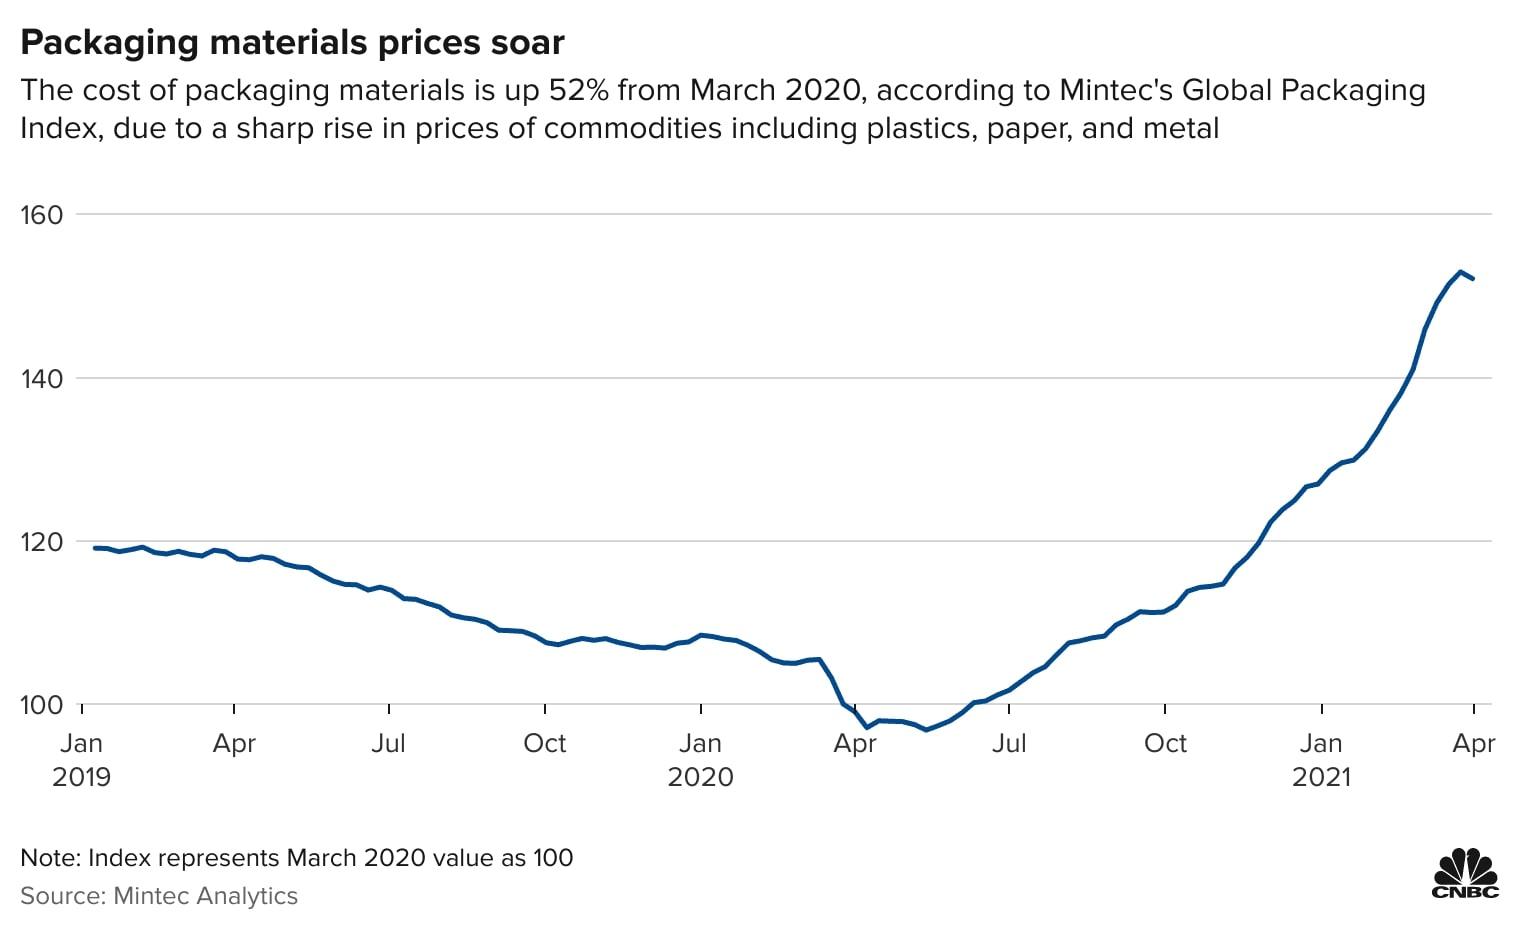 Graph of packaging prices rising since 2020